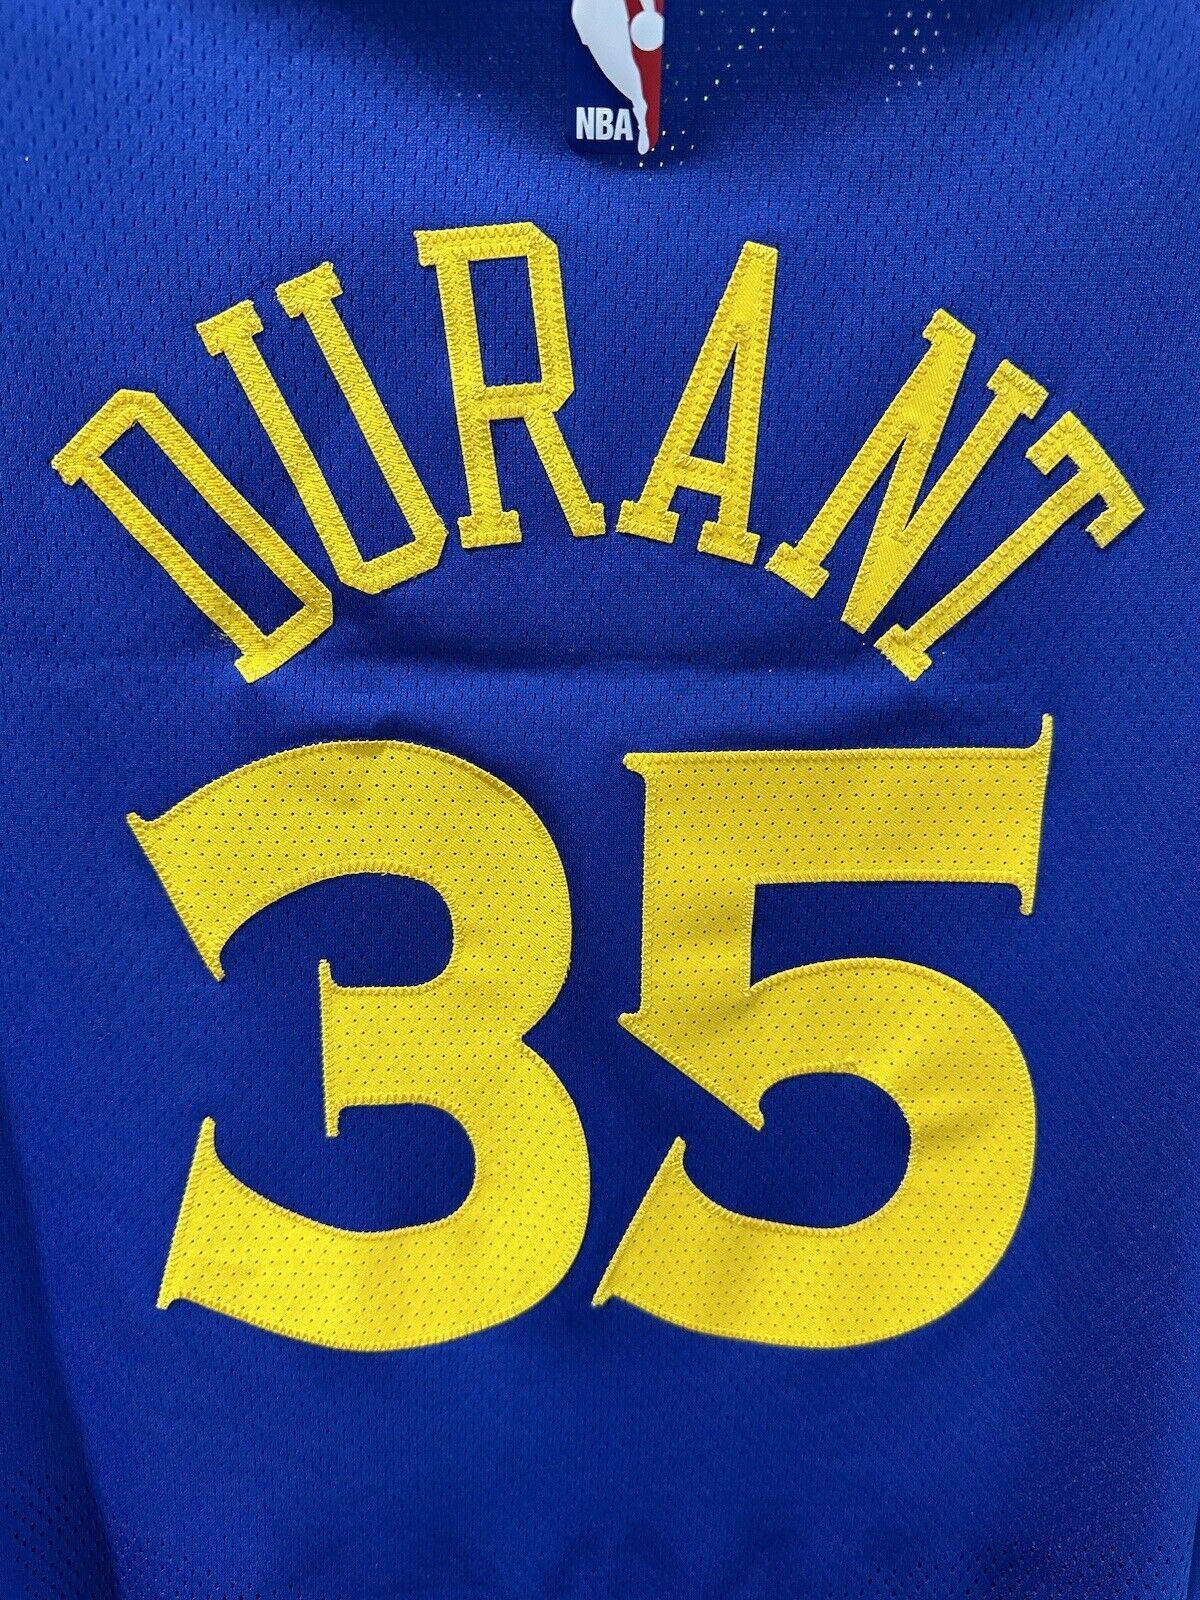 Nike NBA Golden State Warriors AUTHENTIC Icon Jersey DURANT Mens 3XL RRP £180